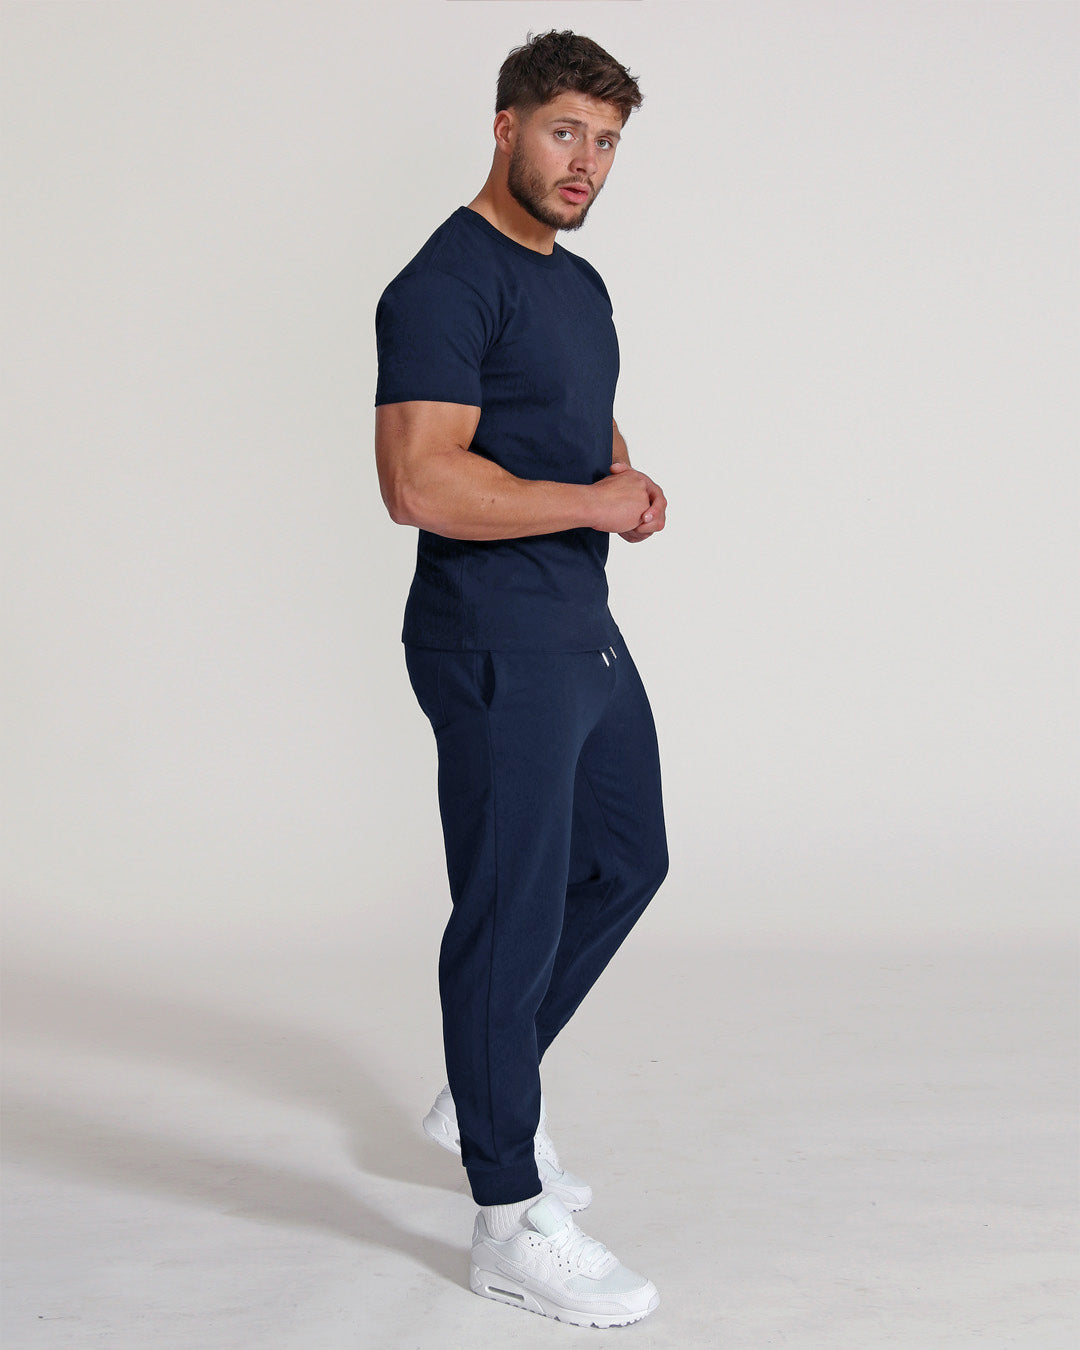 blue navy muscle fitted basics heavyweight brushed cotton t-shirt